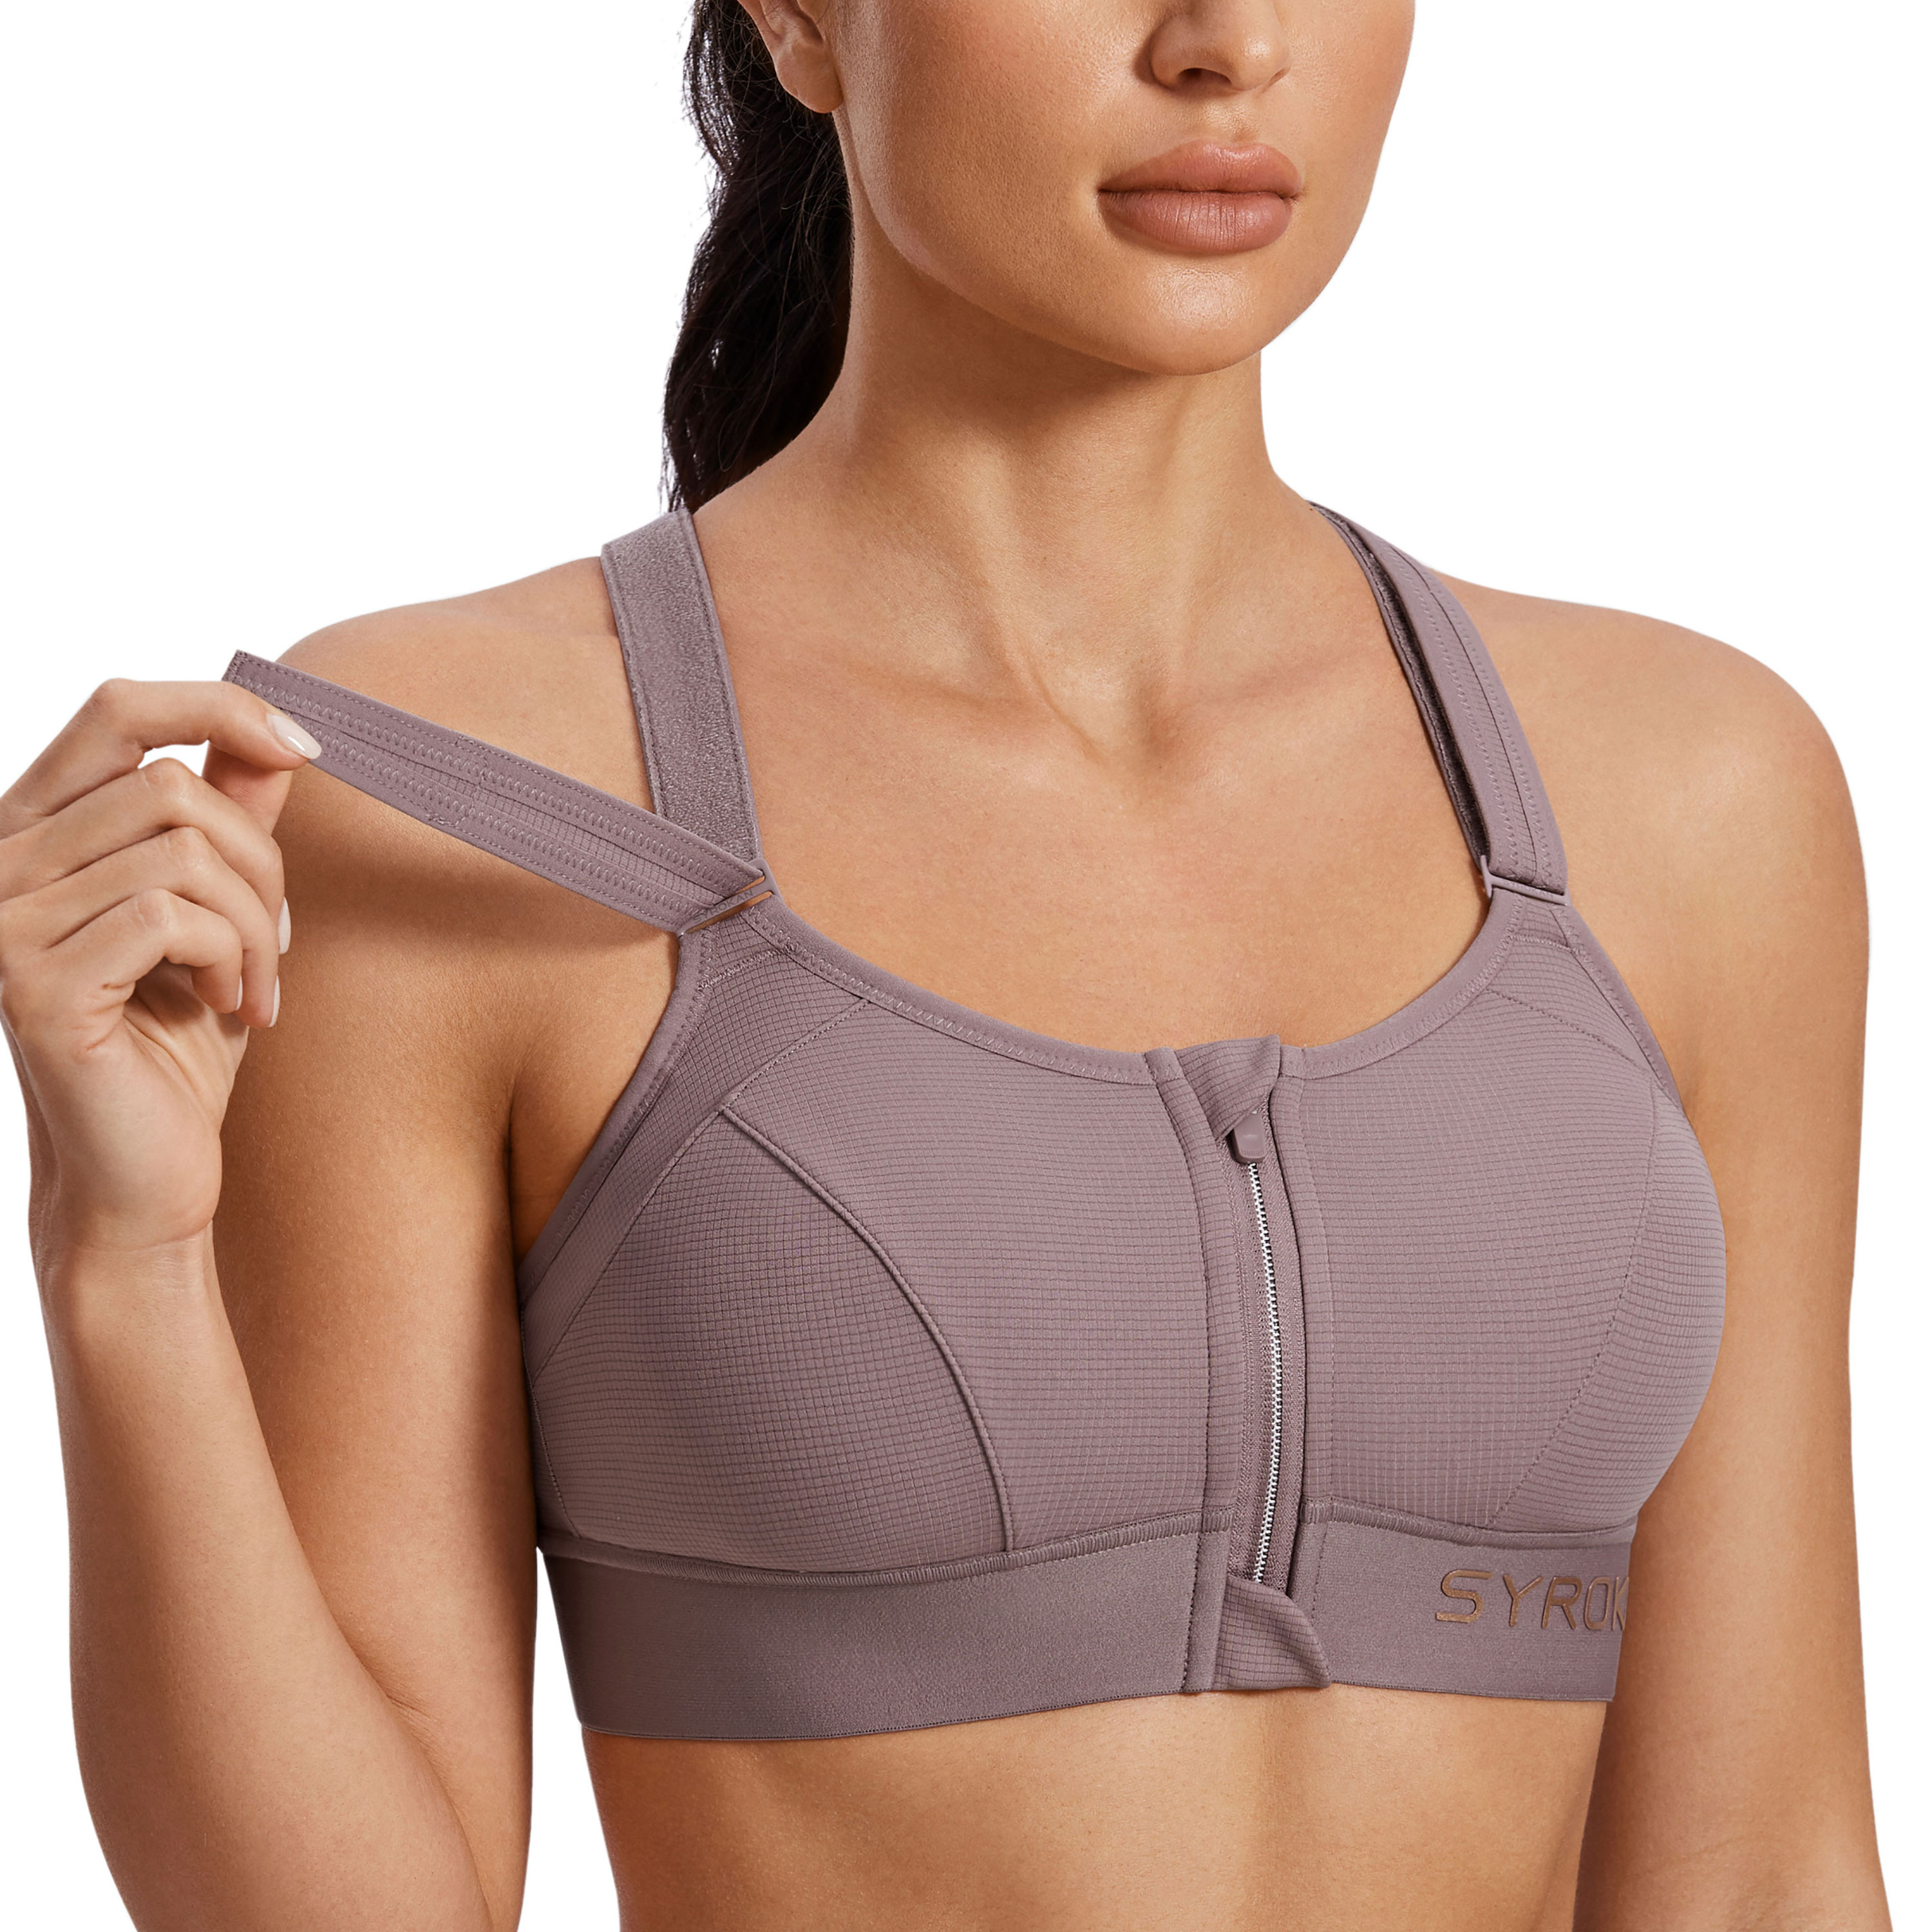 Buy SYROKAN Women's Sports Bra for Large Breasts High Impact Full Coverage  Padded Wireless Running Halter Neck Bra, Pale Straw Green, 38C at